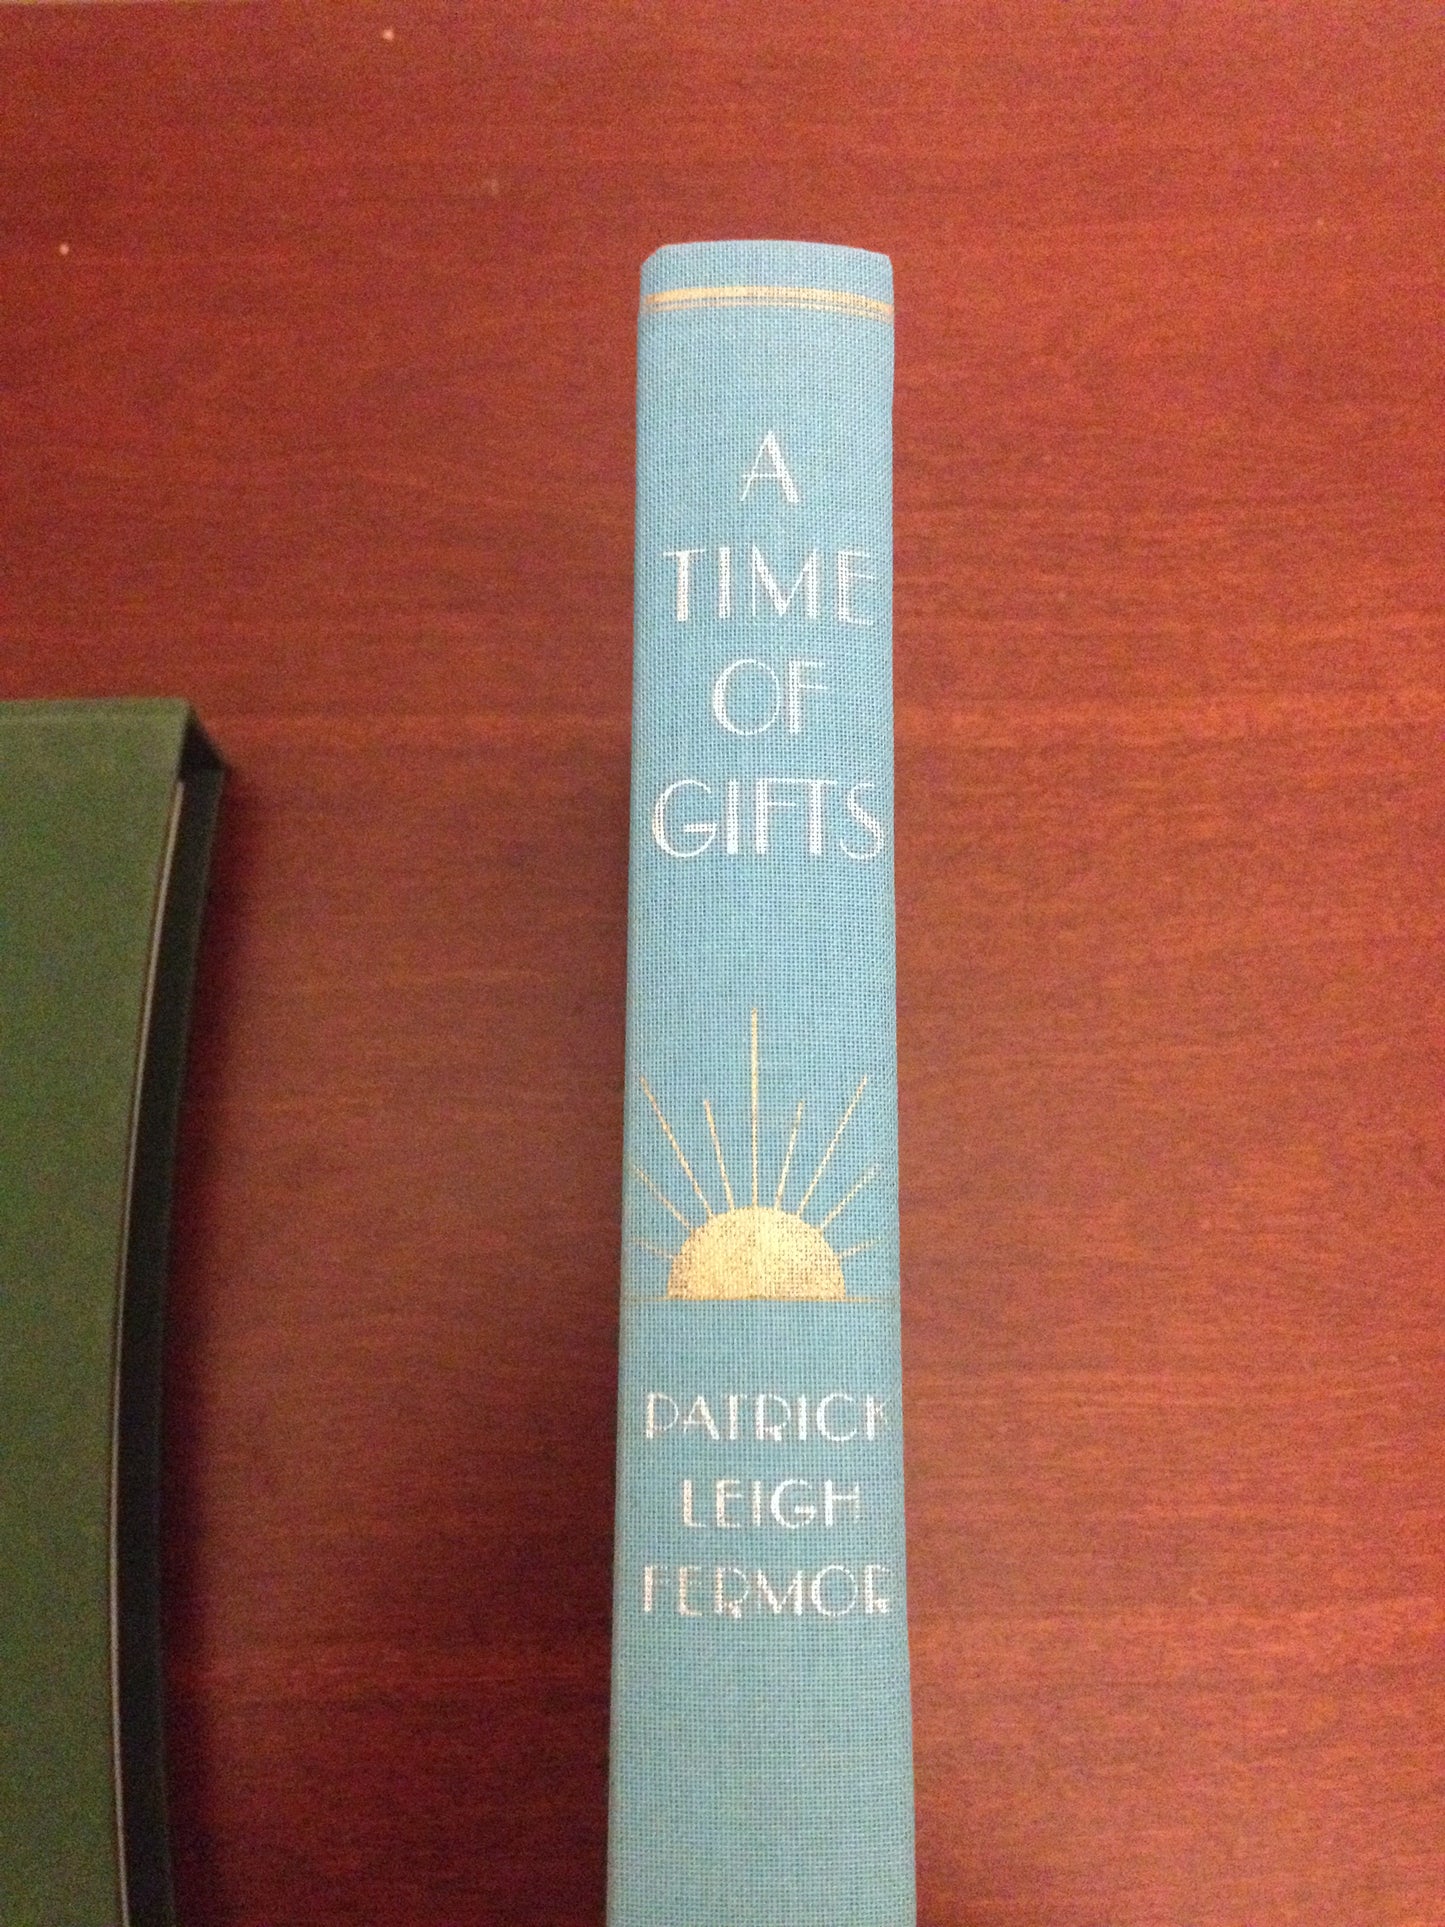 A TIME OF GIFTS - BY PATRICK LEIGH FERMOR